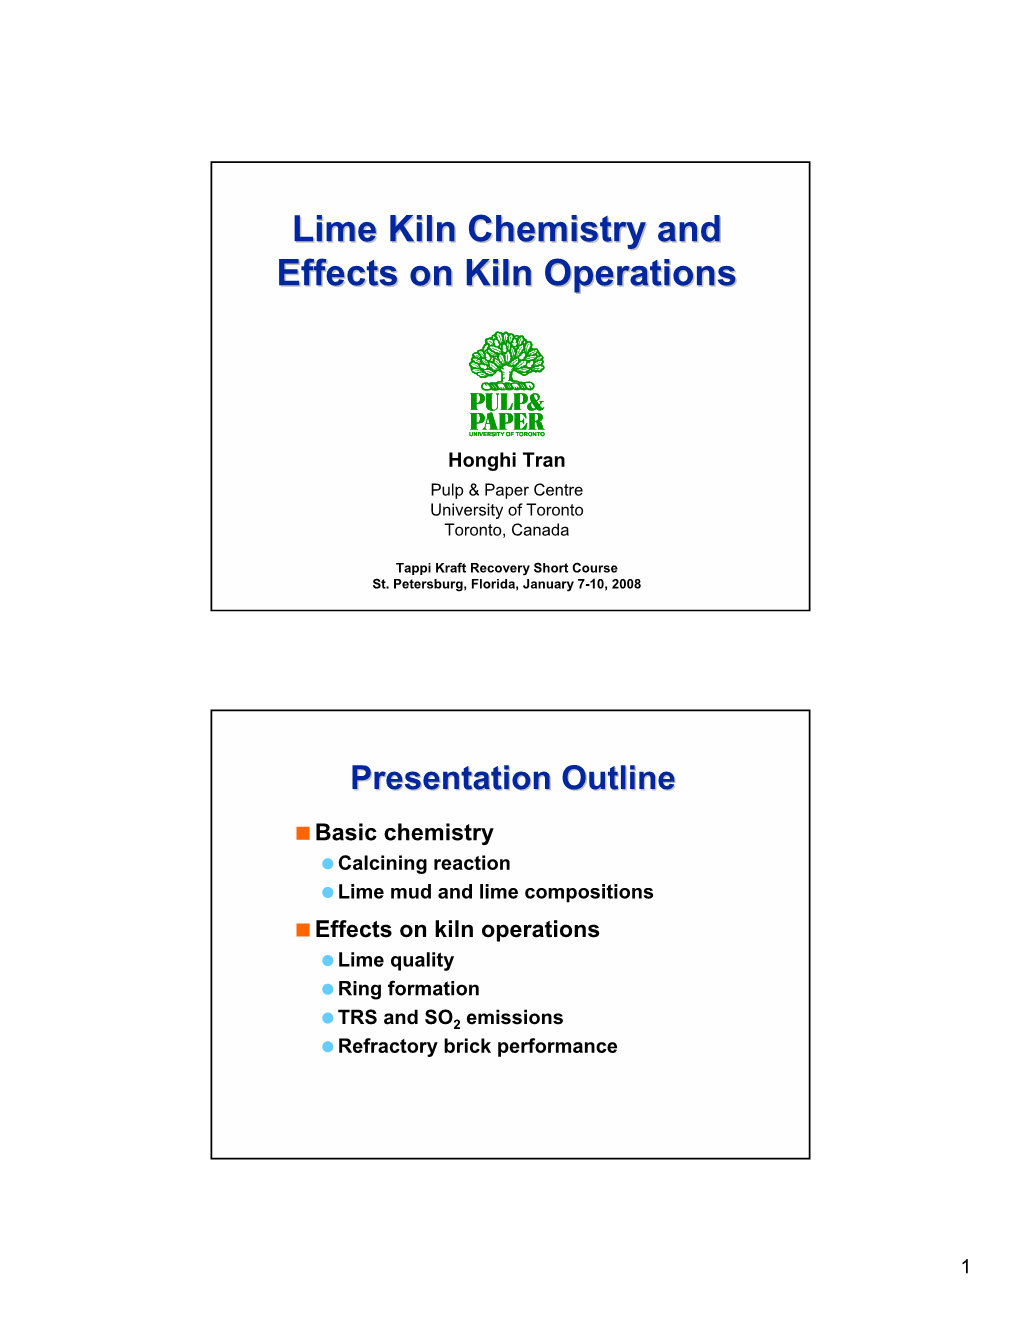 Lime Kiln Chemistry and Effects on Kiln Operations